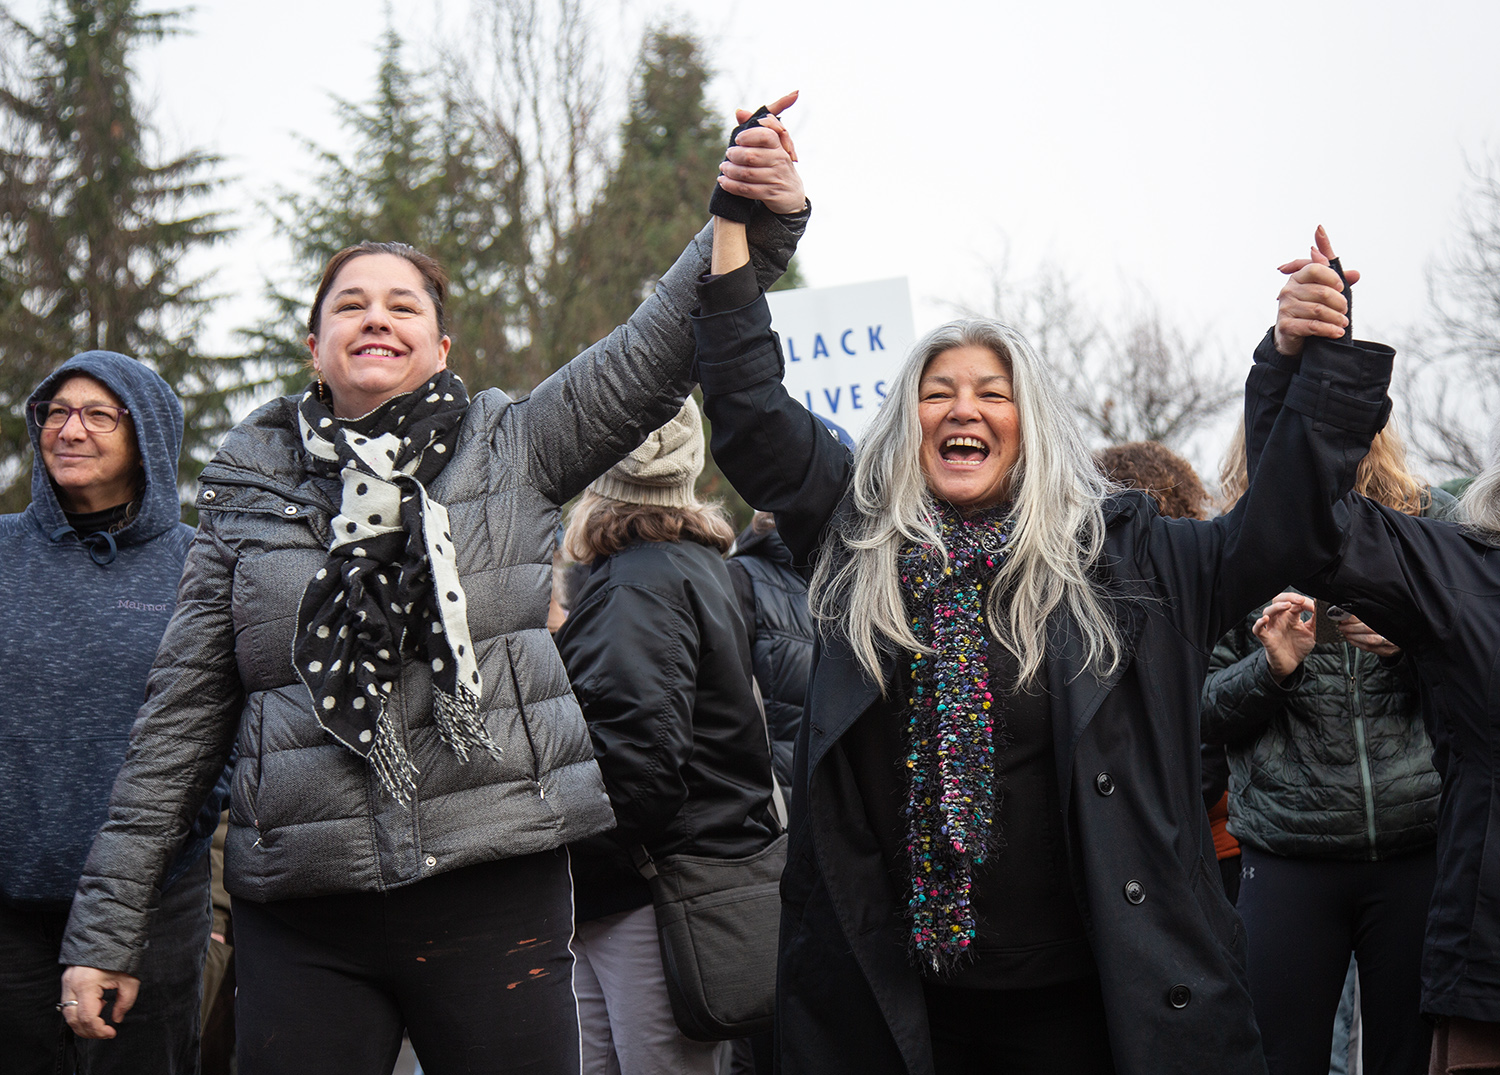  Sabrina Sanchez and Sage Silverstein, left, and Sabrina Sanchez clasp hands as a choir sings during a Martin Luther King Jr. rally outside Autzen Stadium Monday, Jan. 21, 2019, in Eugene. Sanchez said she sees turmoil and mistrust in the national di